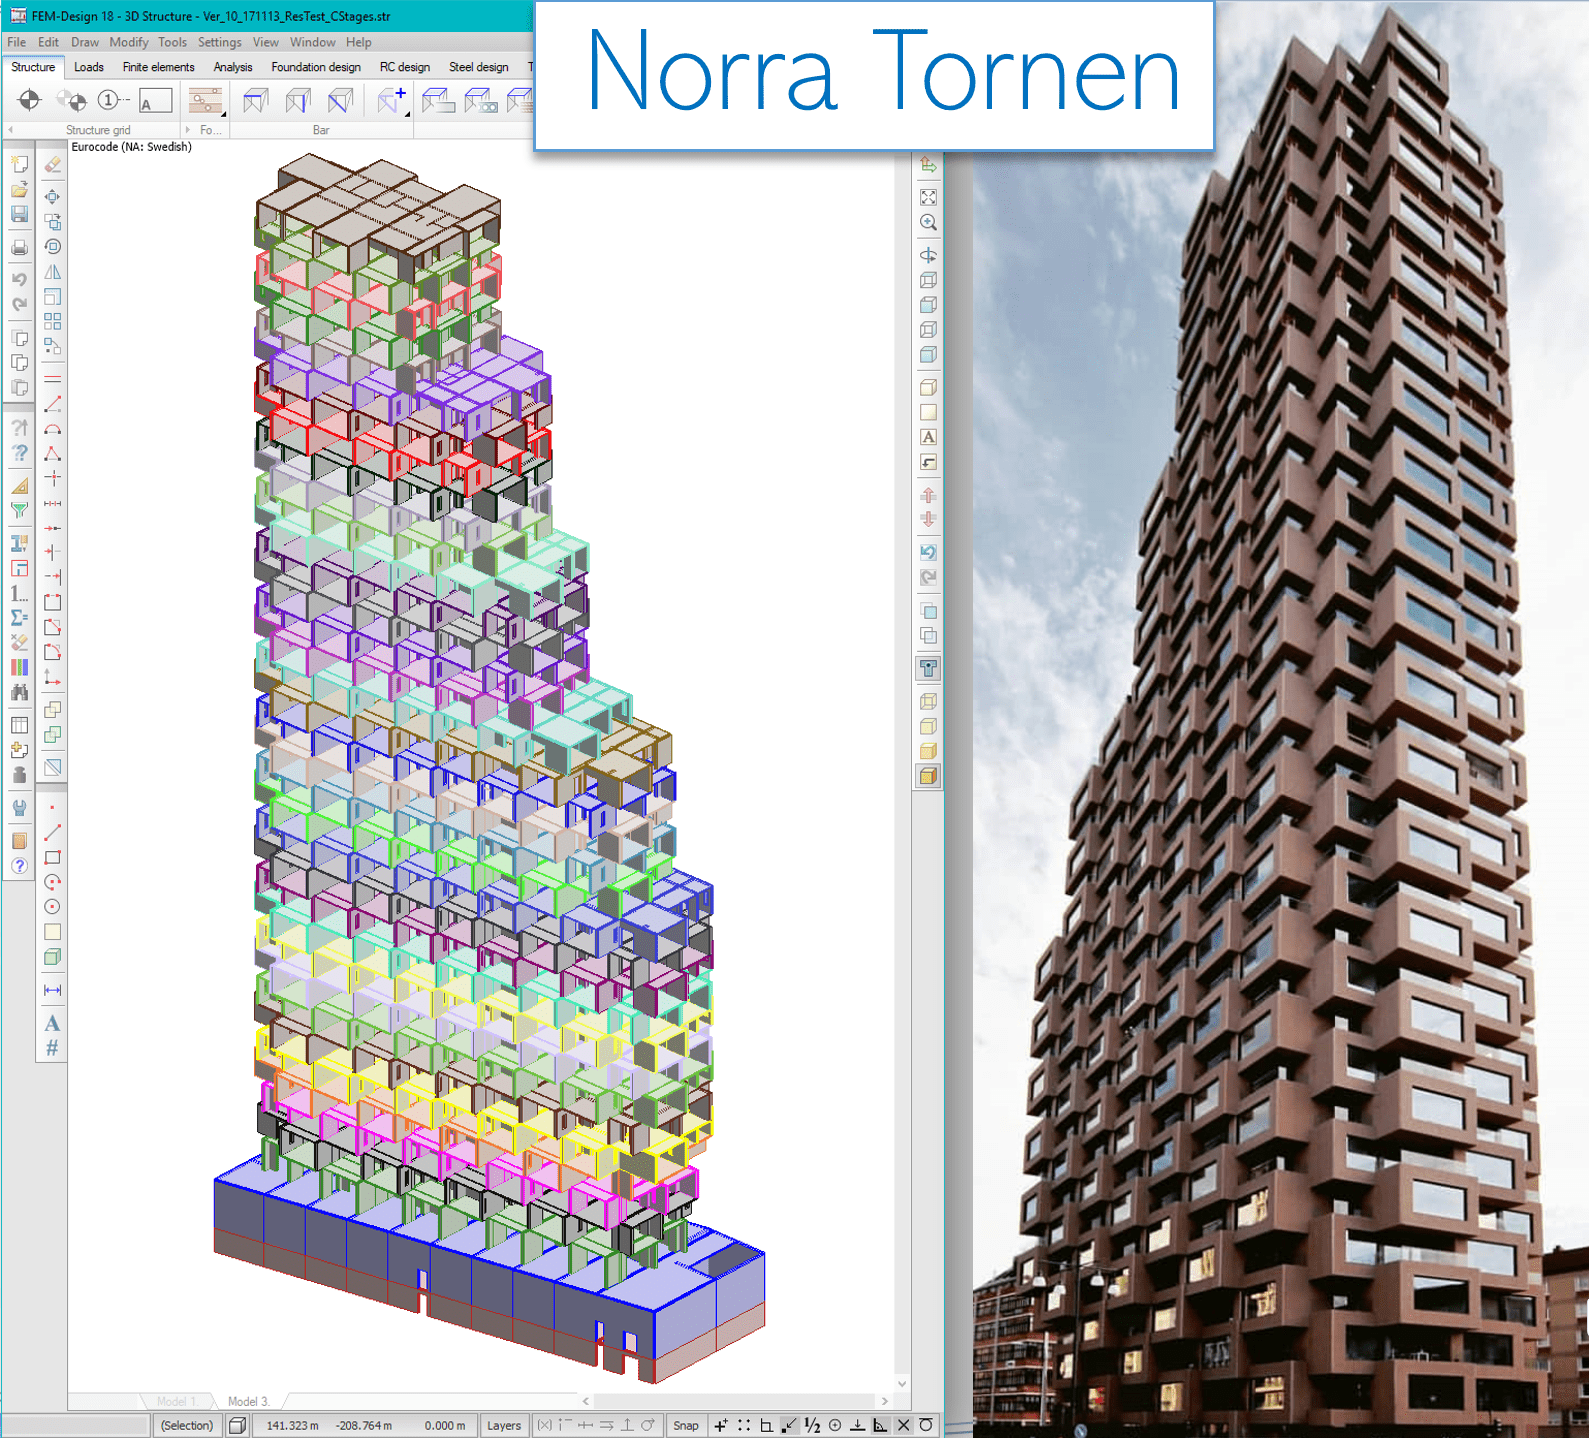 Advanced Structural Load Analysis - Norra Tornen